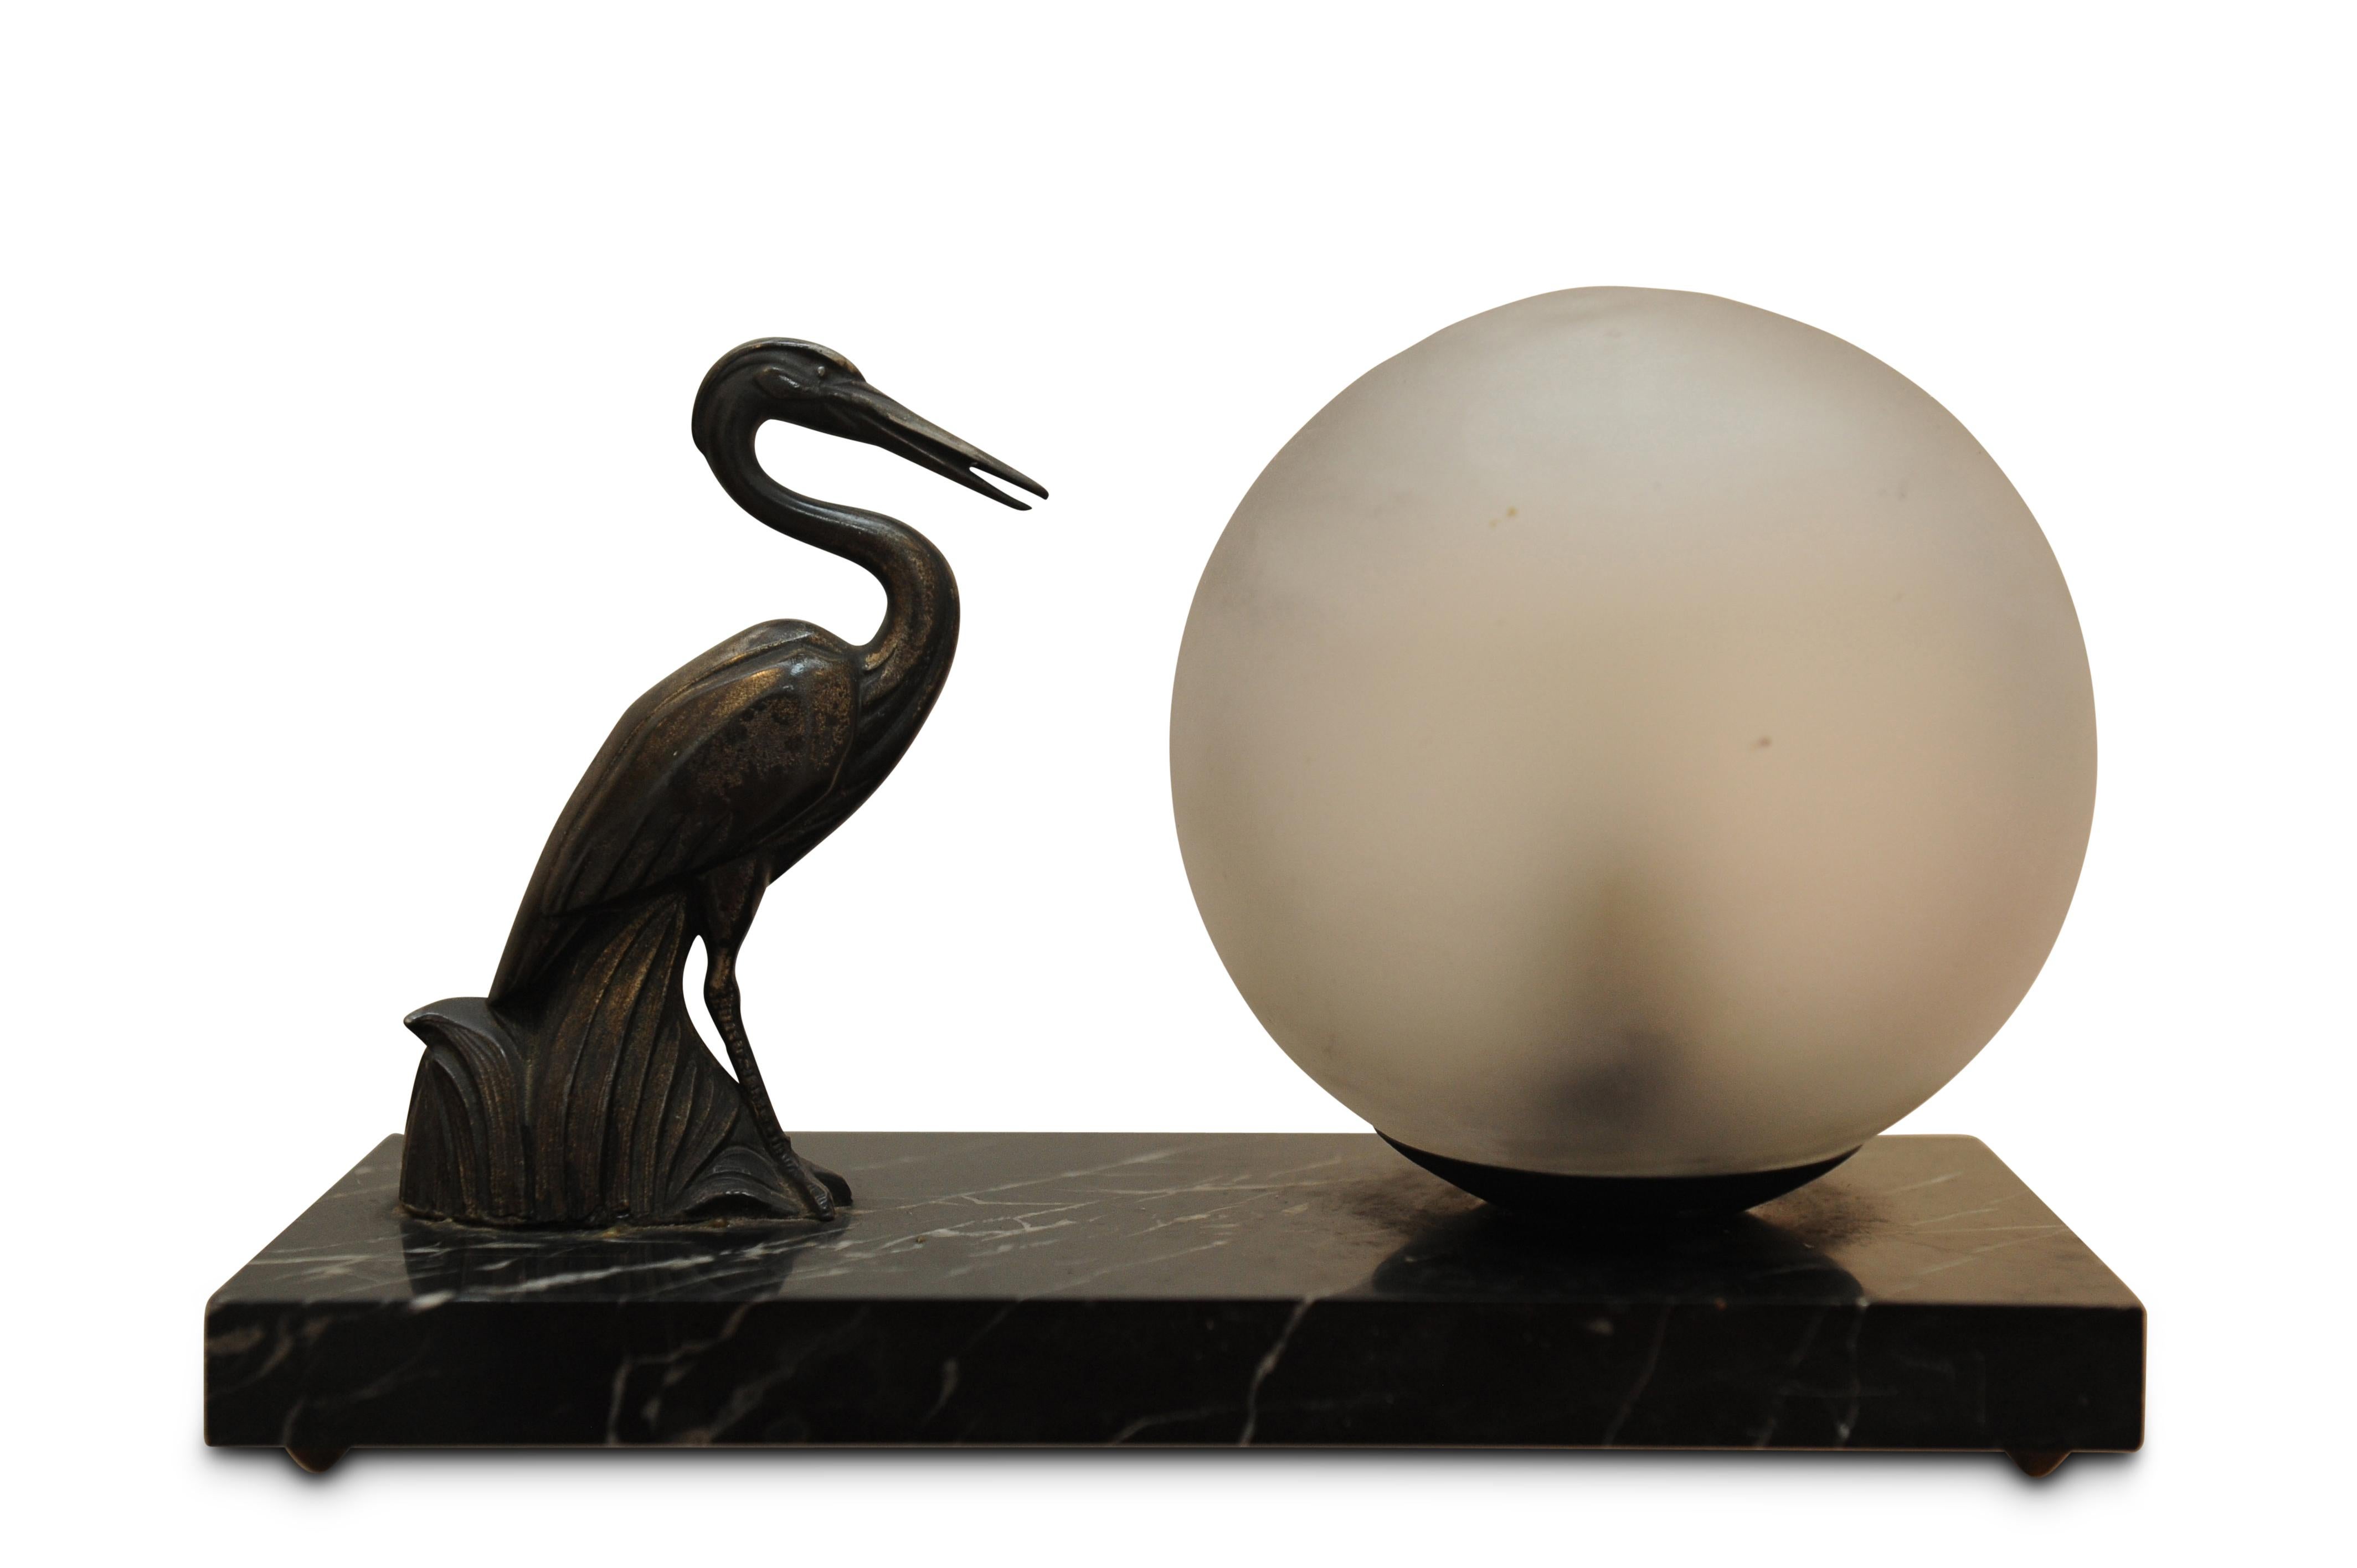 1930s Art Deco table lamp Spelter sculpture of a heron with a glass globe on a marble plinth.

Working and will be fitted with the appropriate plug fixture. No cracks or chips to marble or glass globe only chipping is to base of globe that will